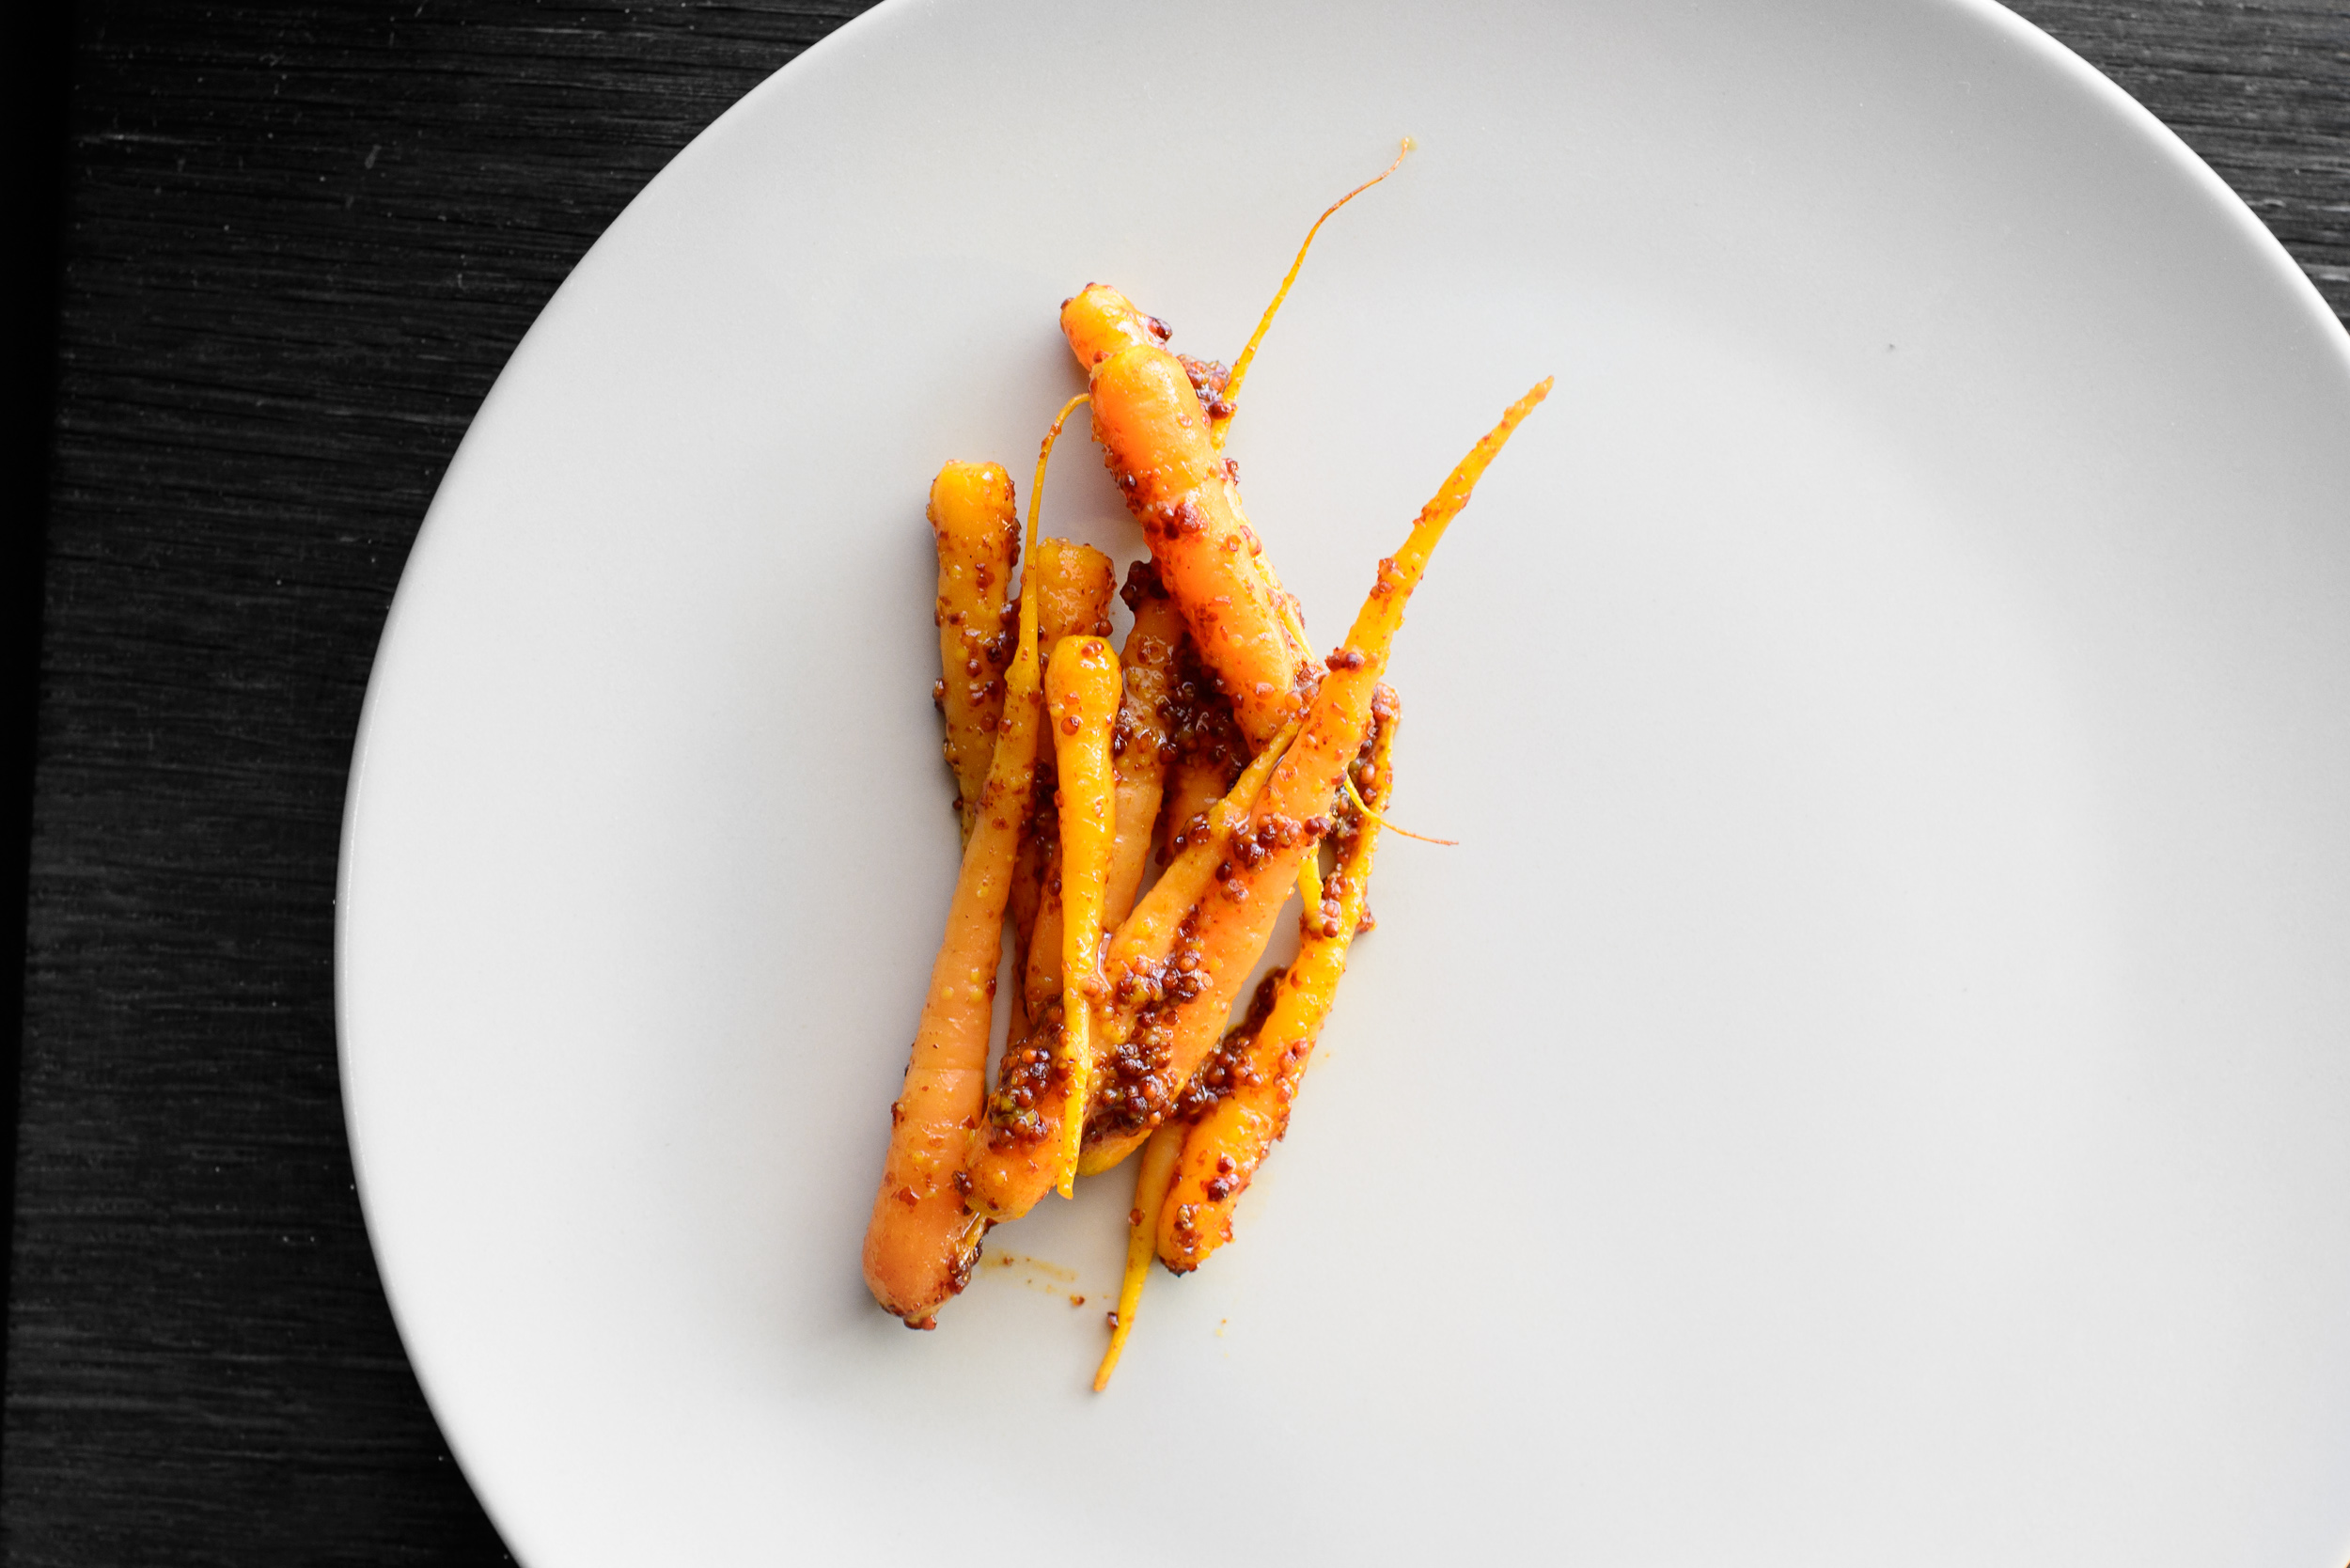 2nd Course: Small carrots, mustard seeds